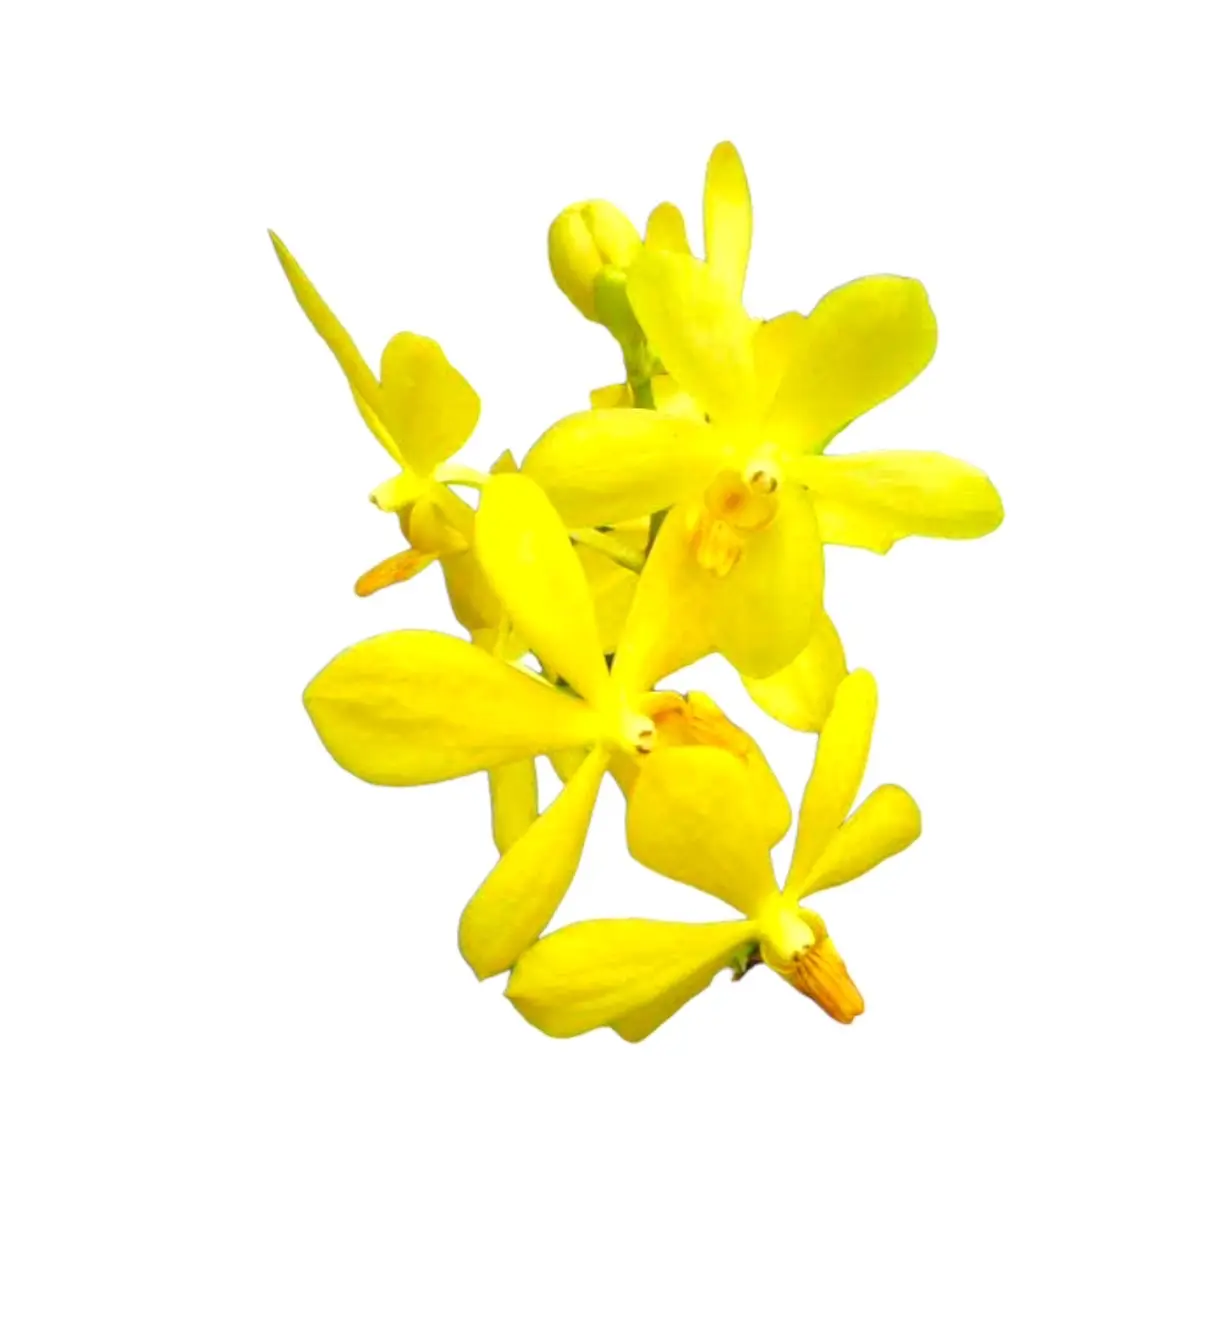 Yellow Mokara Fresh Cut Orchid Flower Orchids Flowers Are Fragrant For Export And Sold Within The Country From Orchid Farmers